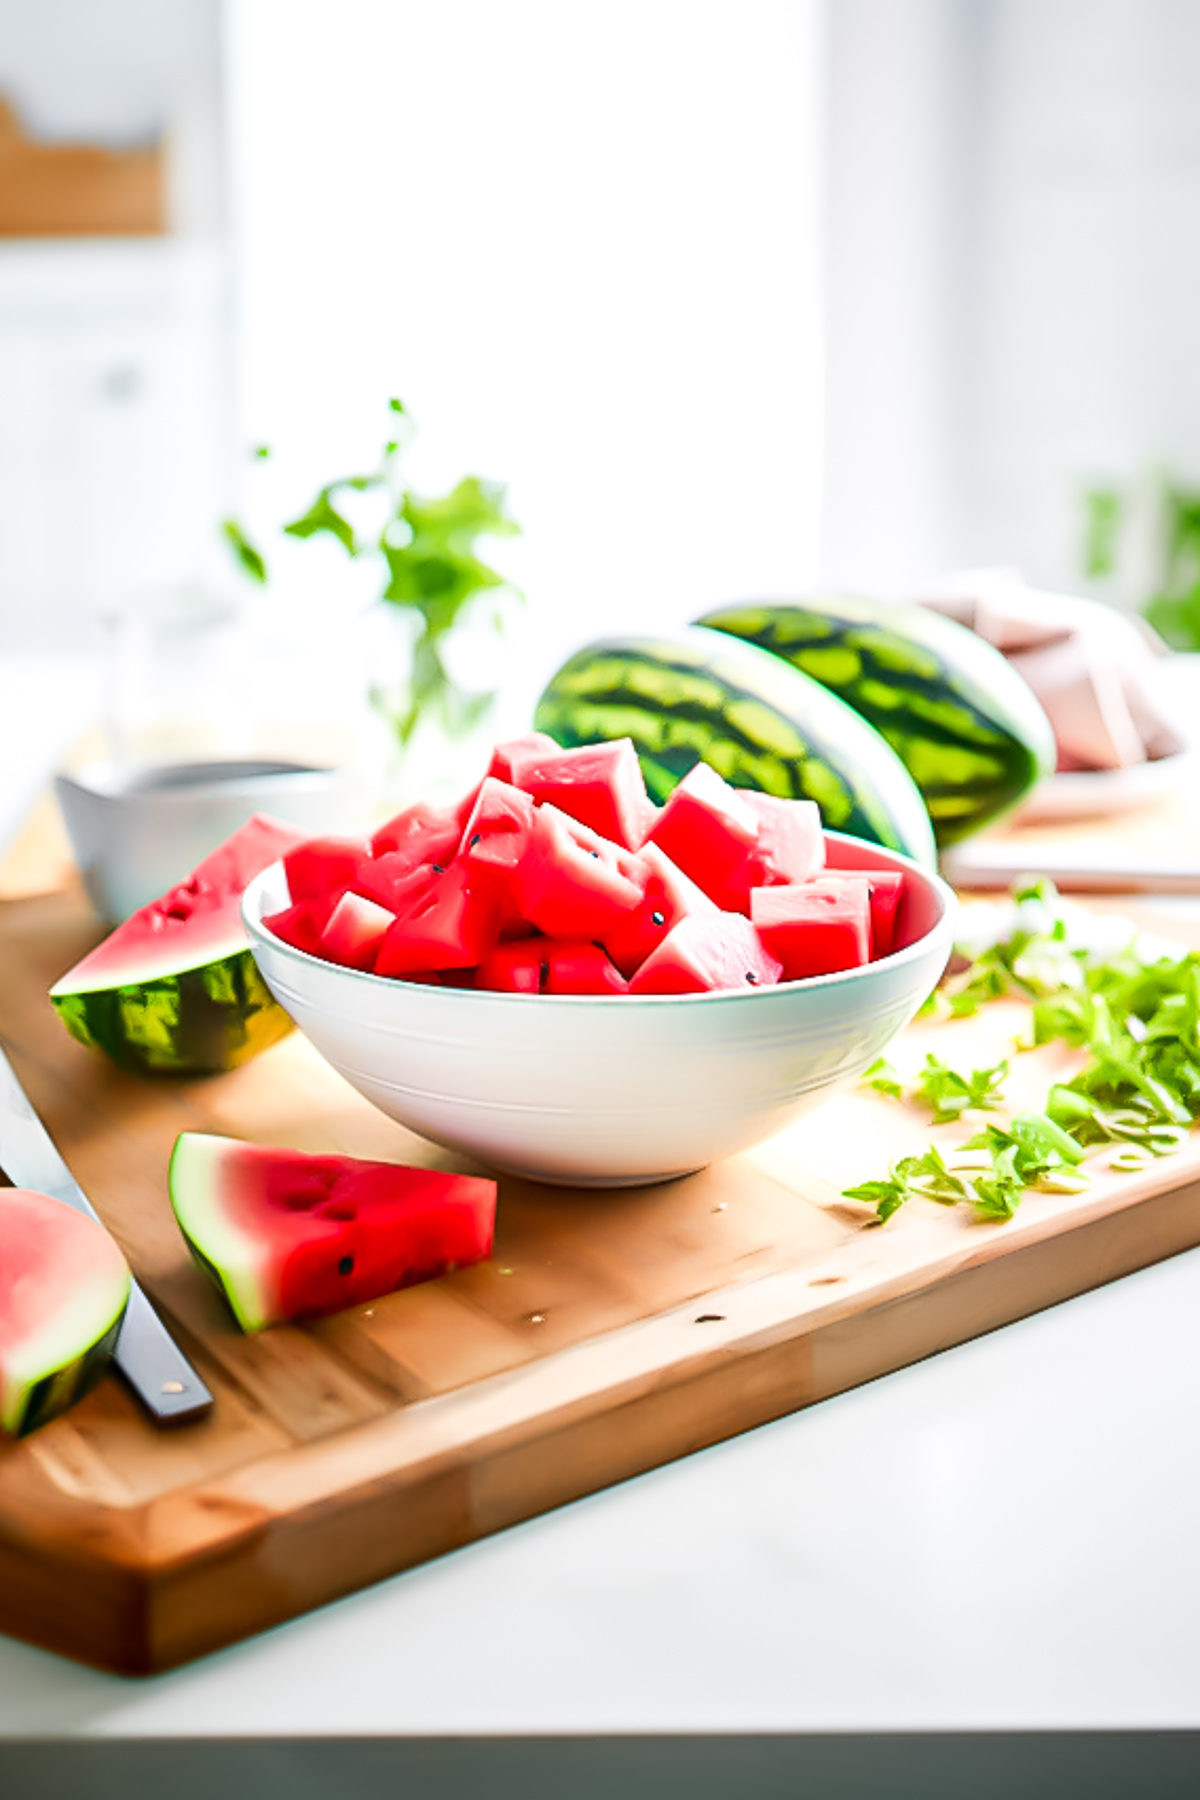 A bowl of watermelon that has been cut into large chunks, sitting on a wooden cutting board.